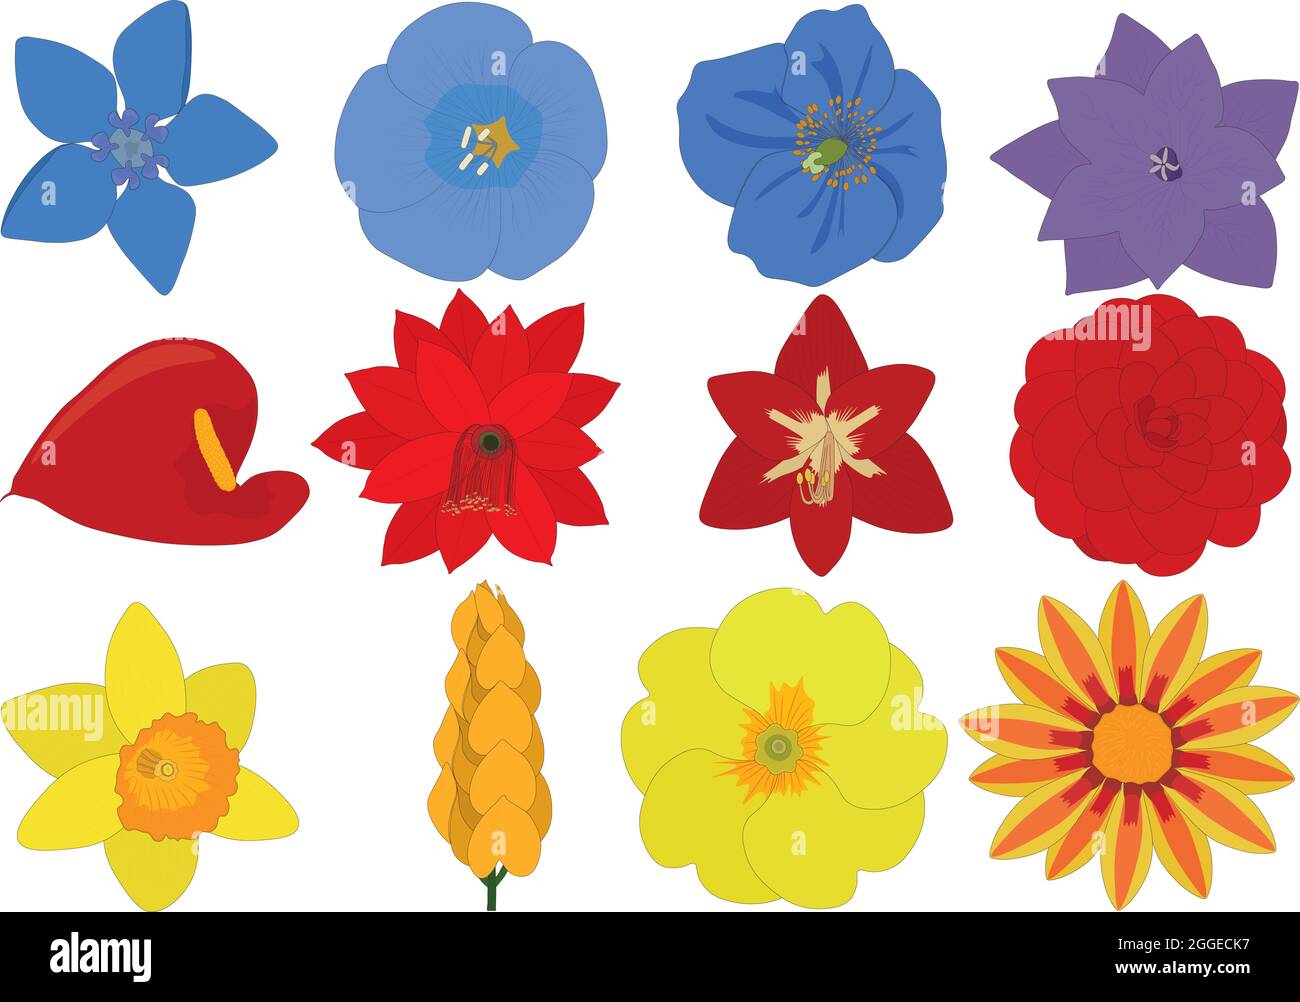 Bright blue, red and yellow flowers collection vector illustration Stock Vector